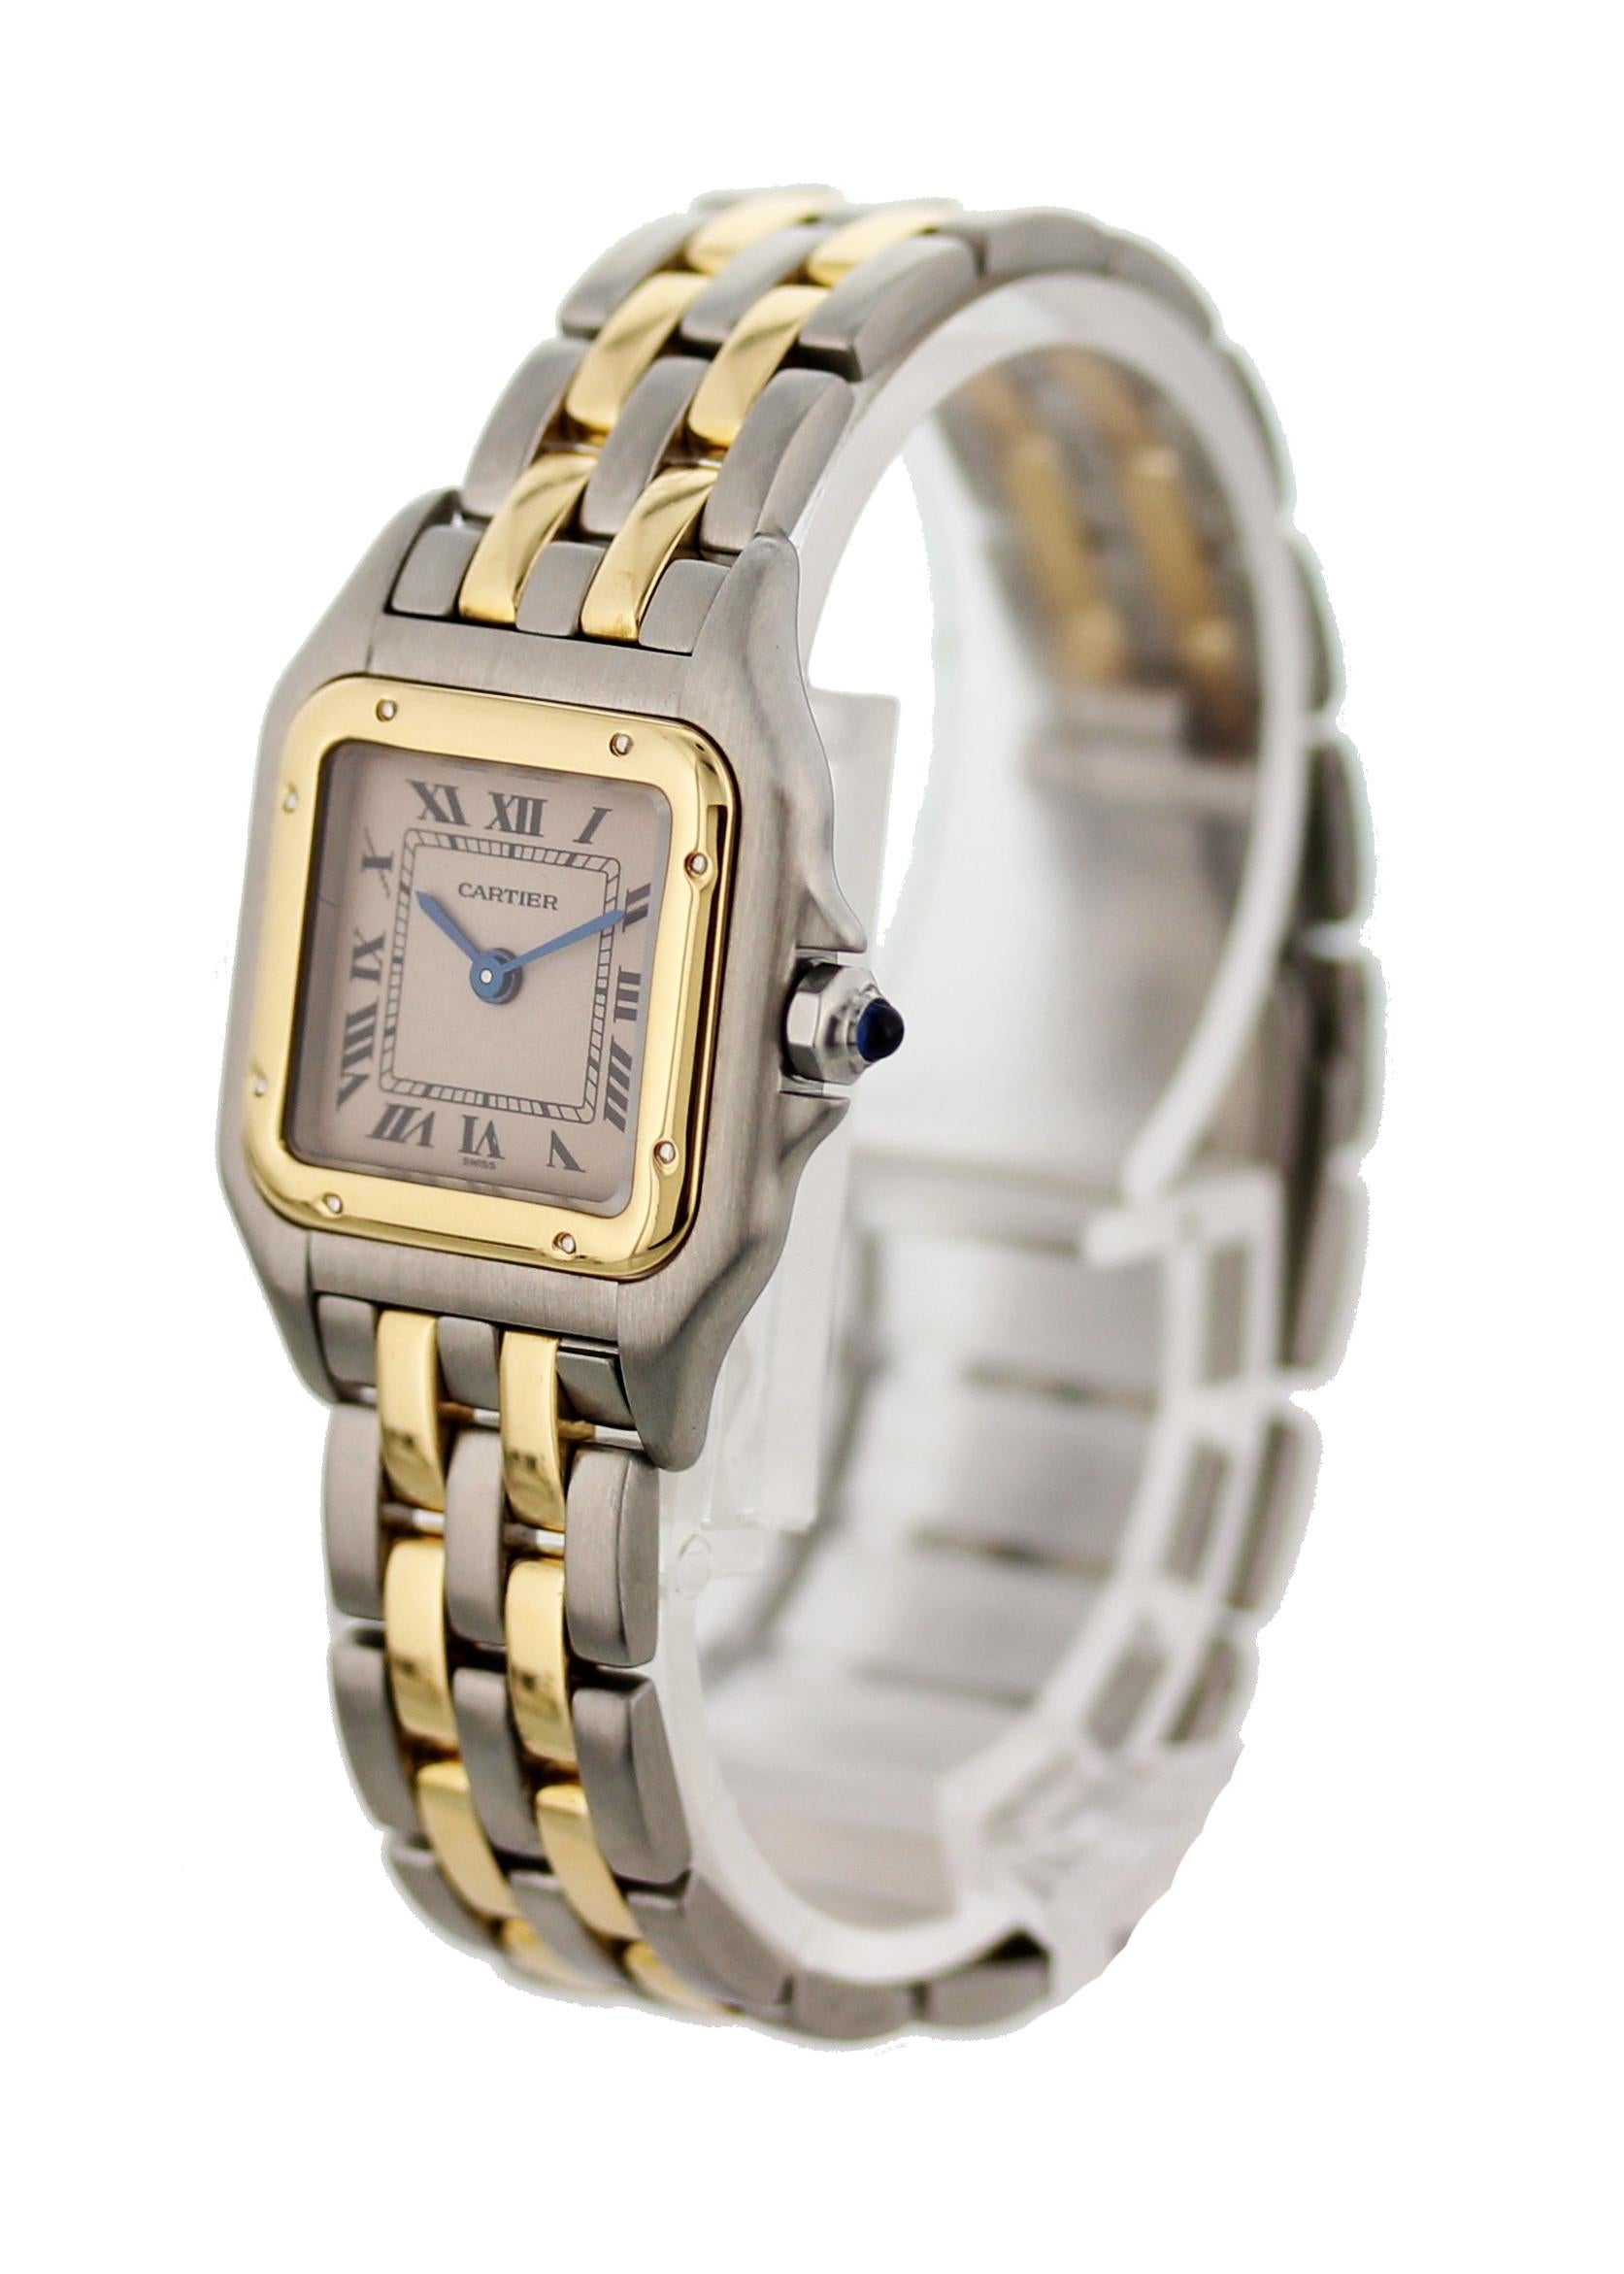 Cartier Panthere 1120 Two-Tone Ladies Watch. 22 mm stainless steel case. 18K yellow gold bezel. Off-white dial with blue steel hands and black Roman numerals. 18K yellow gold and stainless steel band with stainless steel hidden butterfly clasp. Will